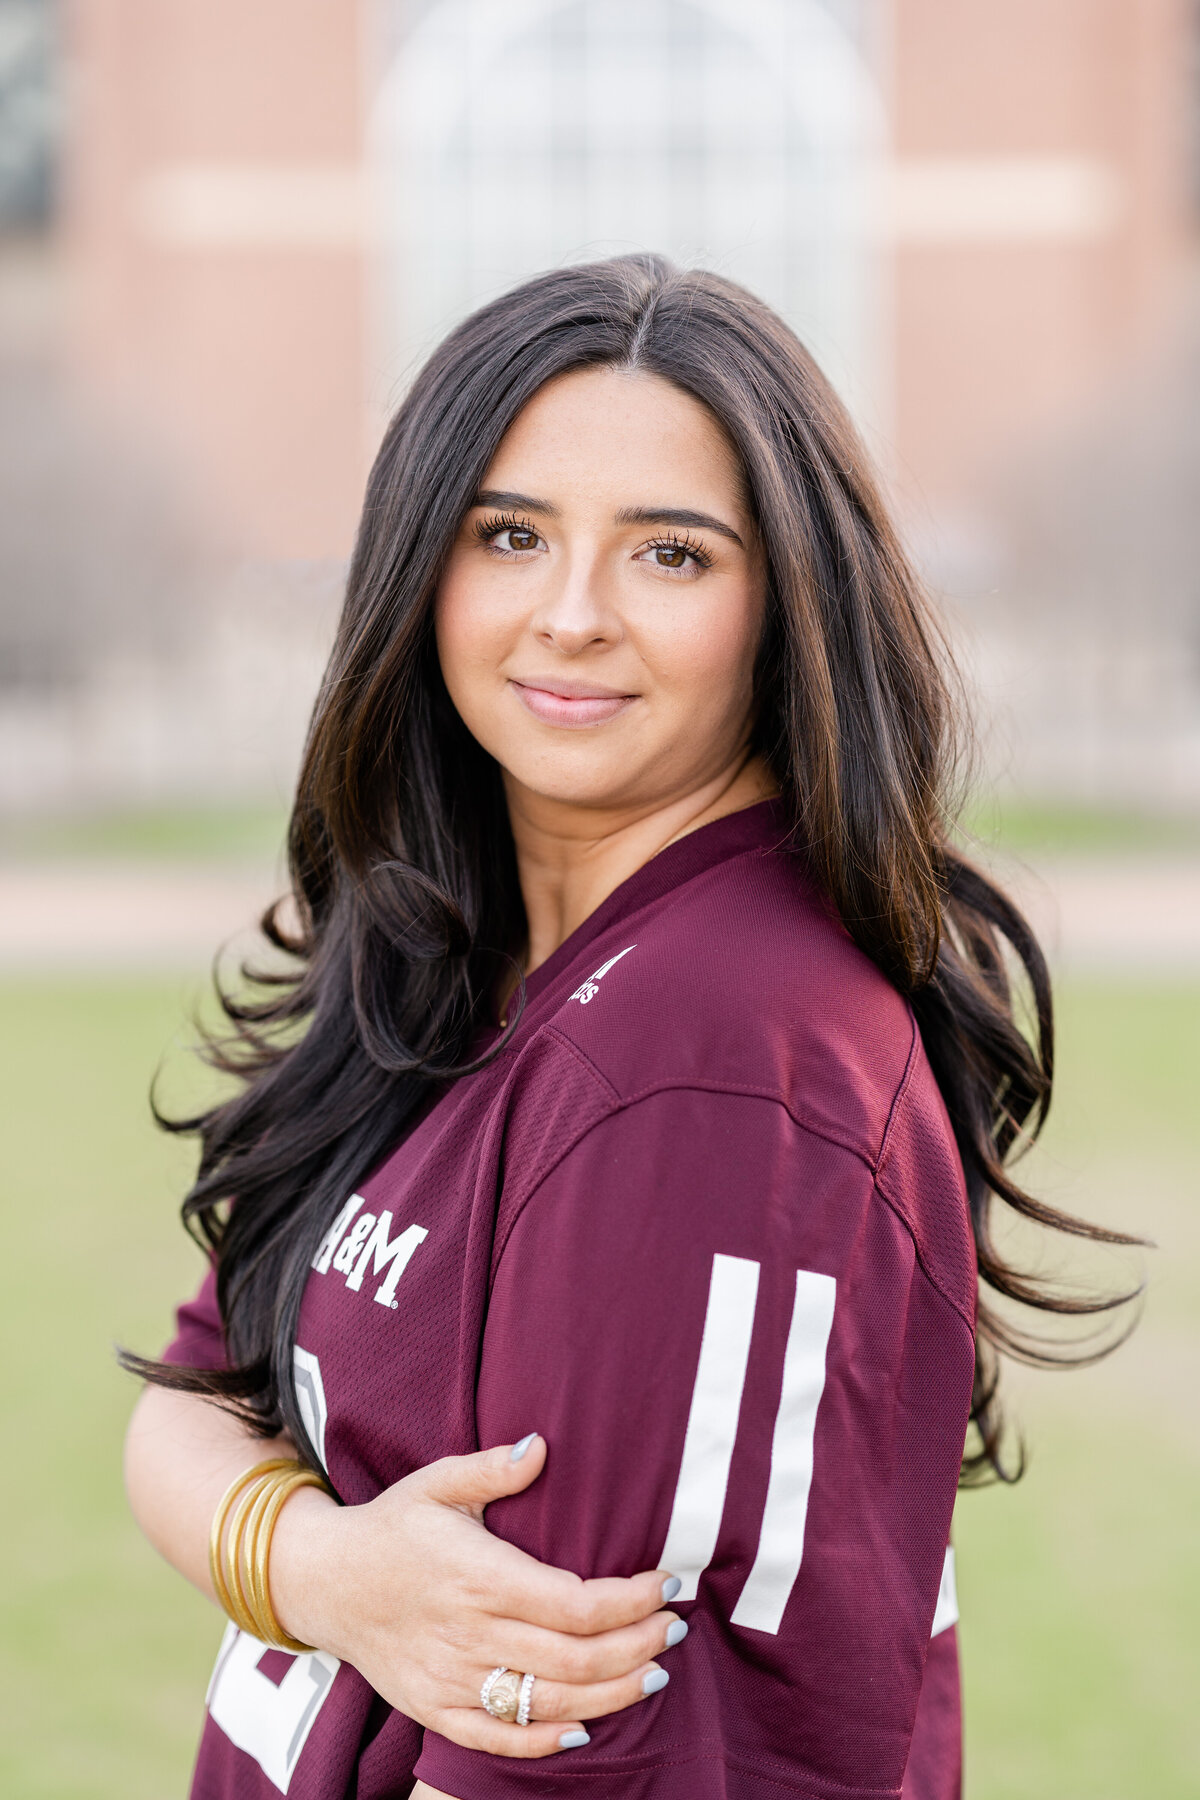 Texas A&M senior girl wearing maroon jersey and smiling over shoulder while holding elbow in Aggie Park in front of Kyle Field